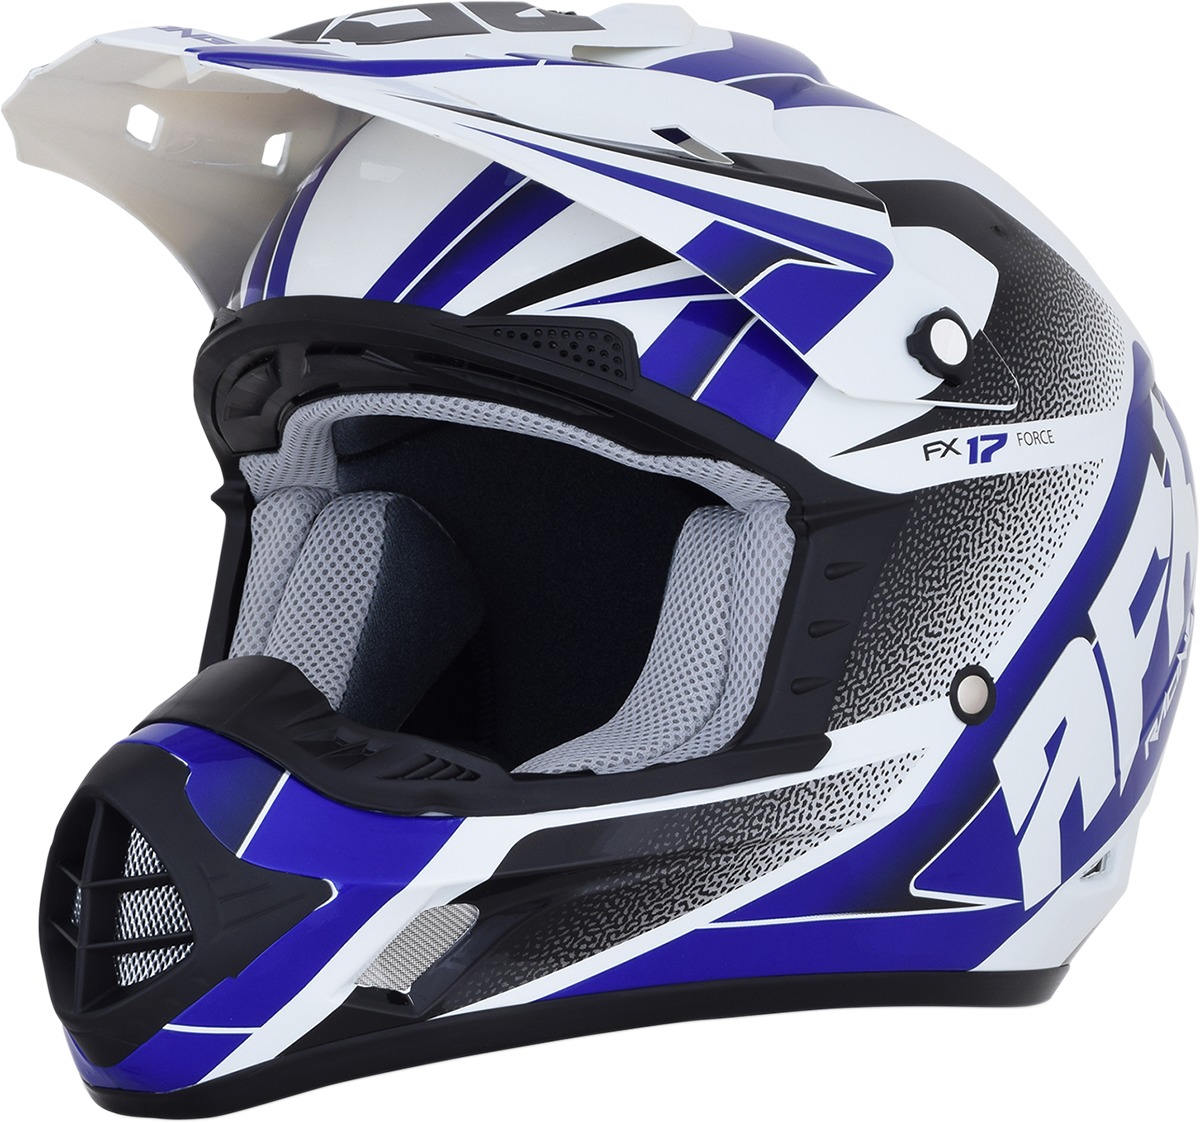 FX-17 Force Full Face Offroad Helmet Blue/White/Black Small - Click Image to Close